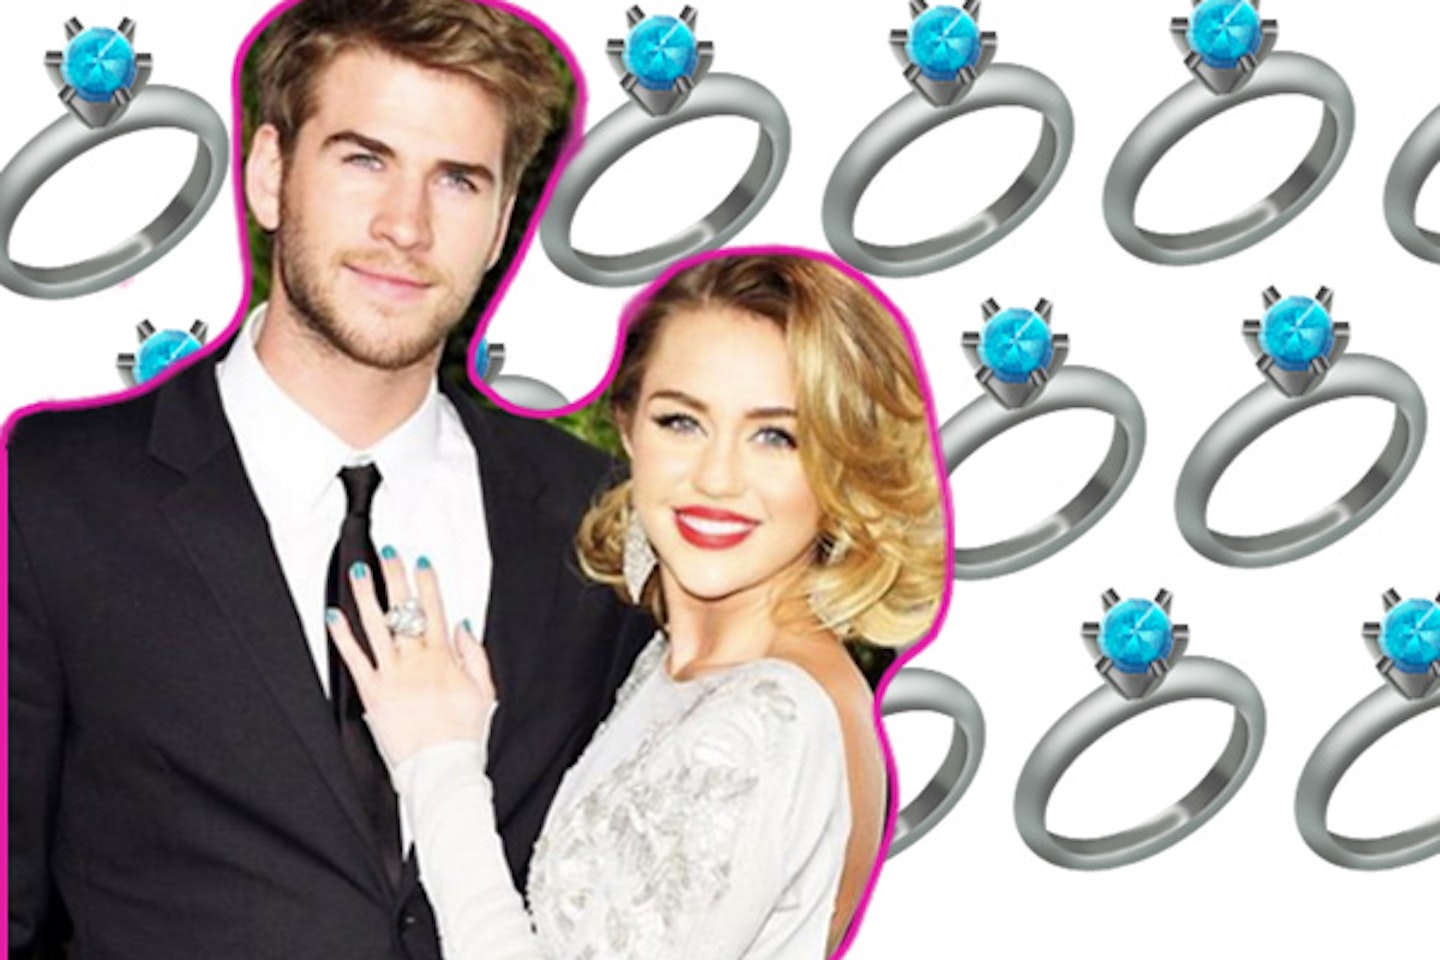 Miley Cyrus and Liam Hemsworth married